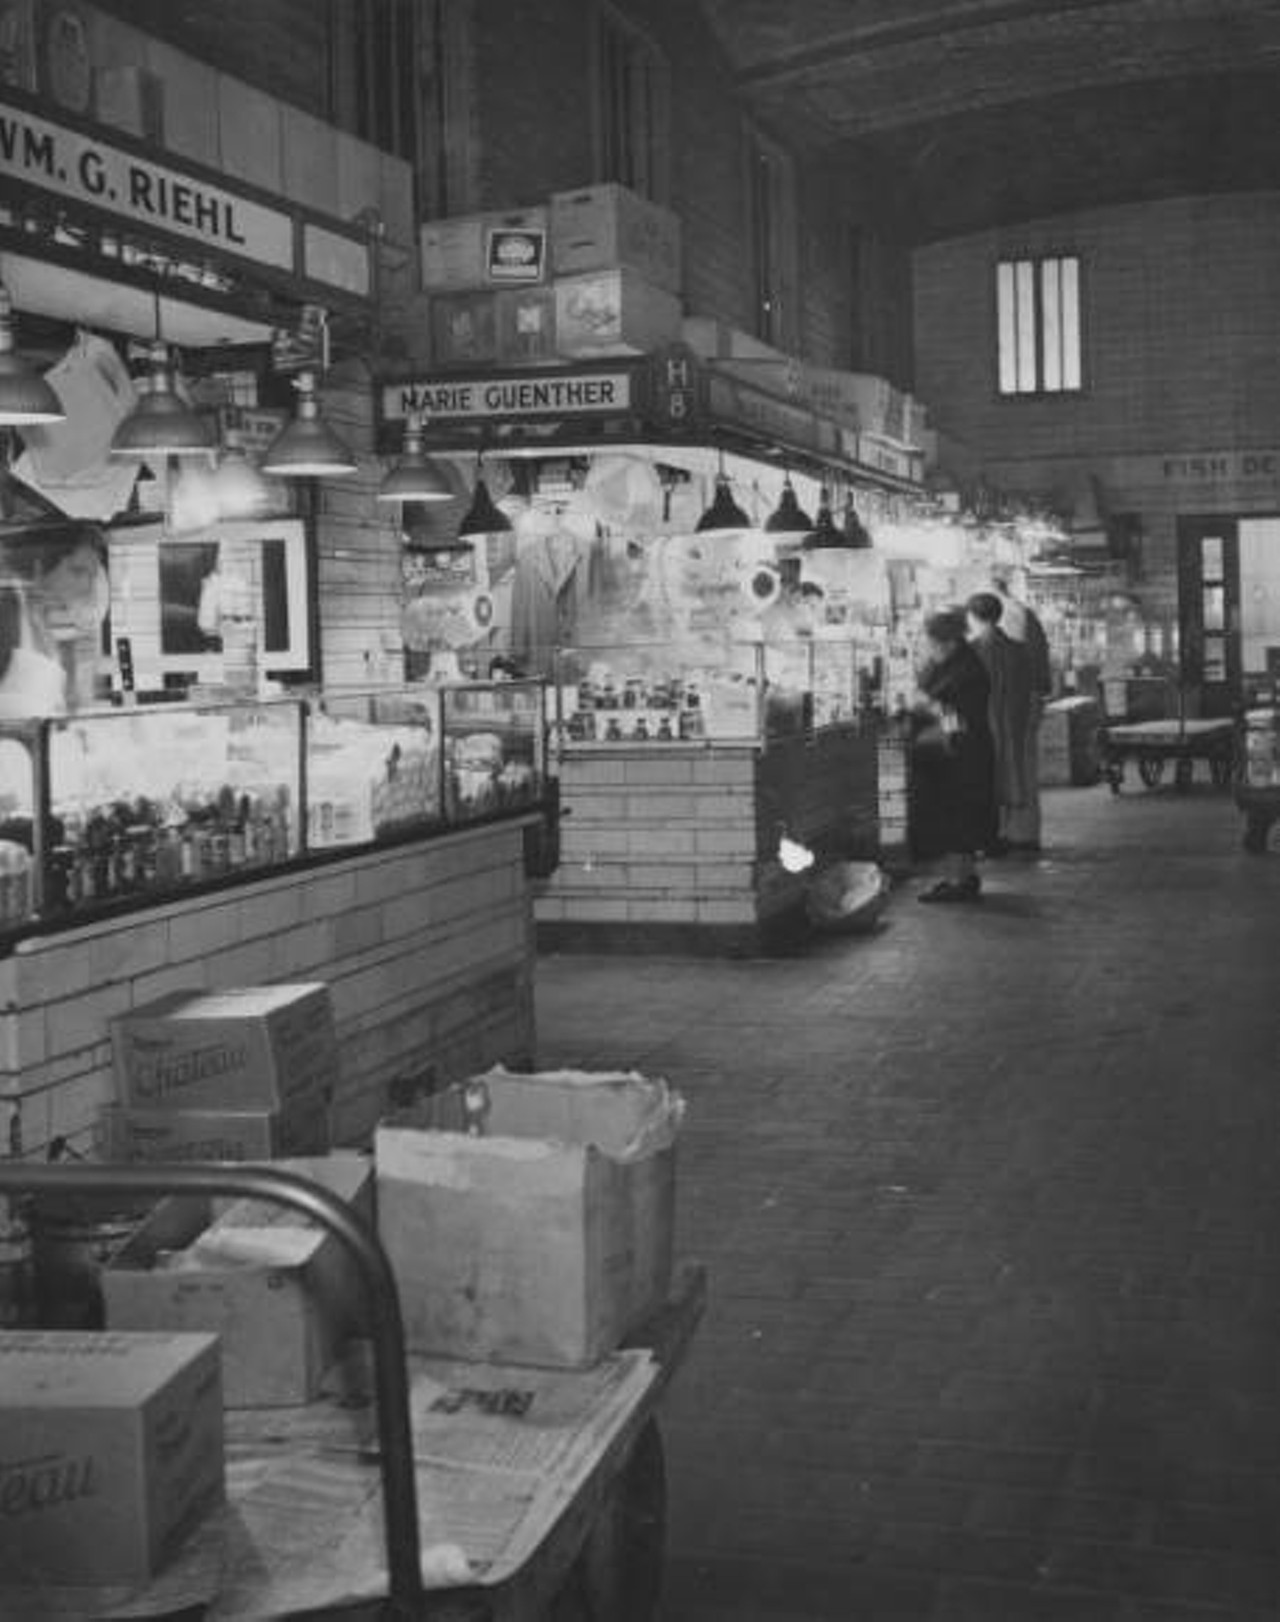 Interior view with few visible shoppers. Stalls for Wm G. Riehl and Marie Guenther at left. c. 1948